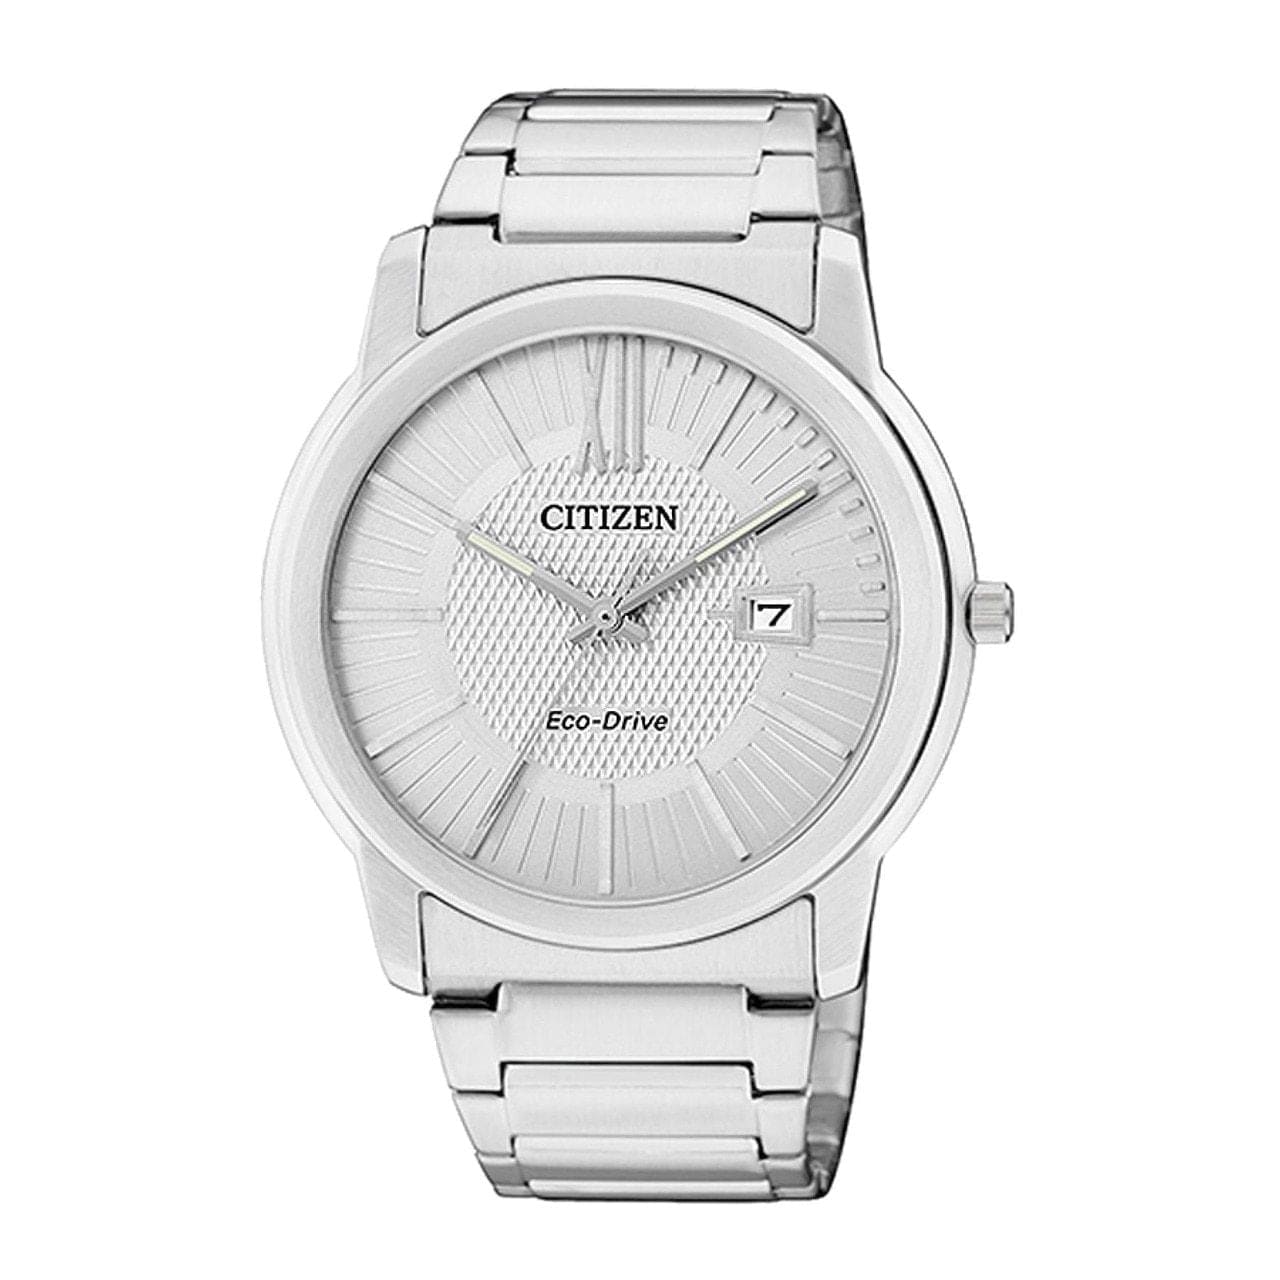 Citizen AW1210-58A Silver Stainless Steel White Textured Dial Men's Eco-Drive Watch 4974374228406